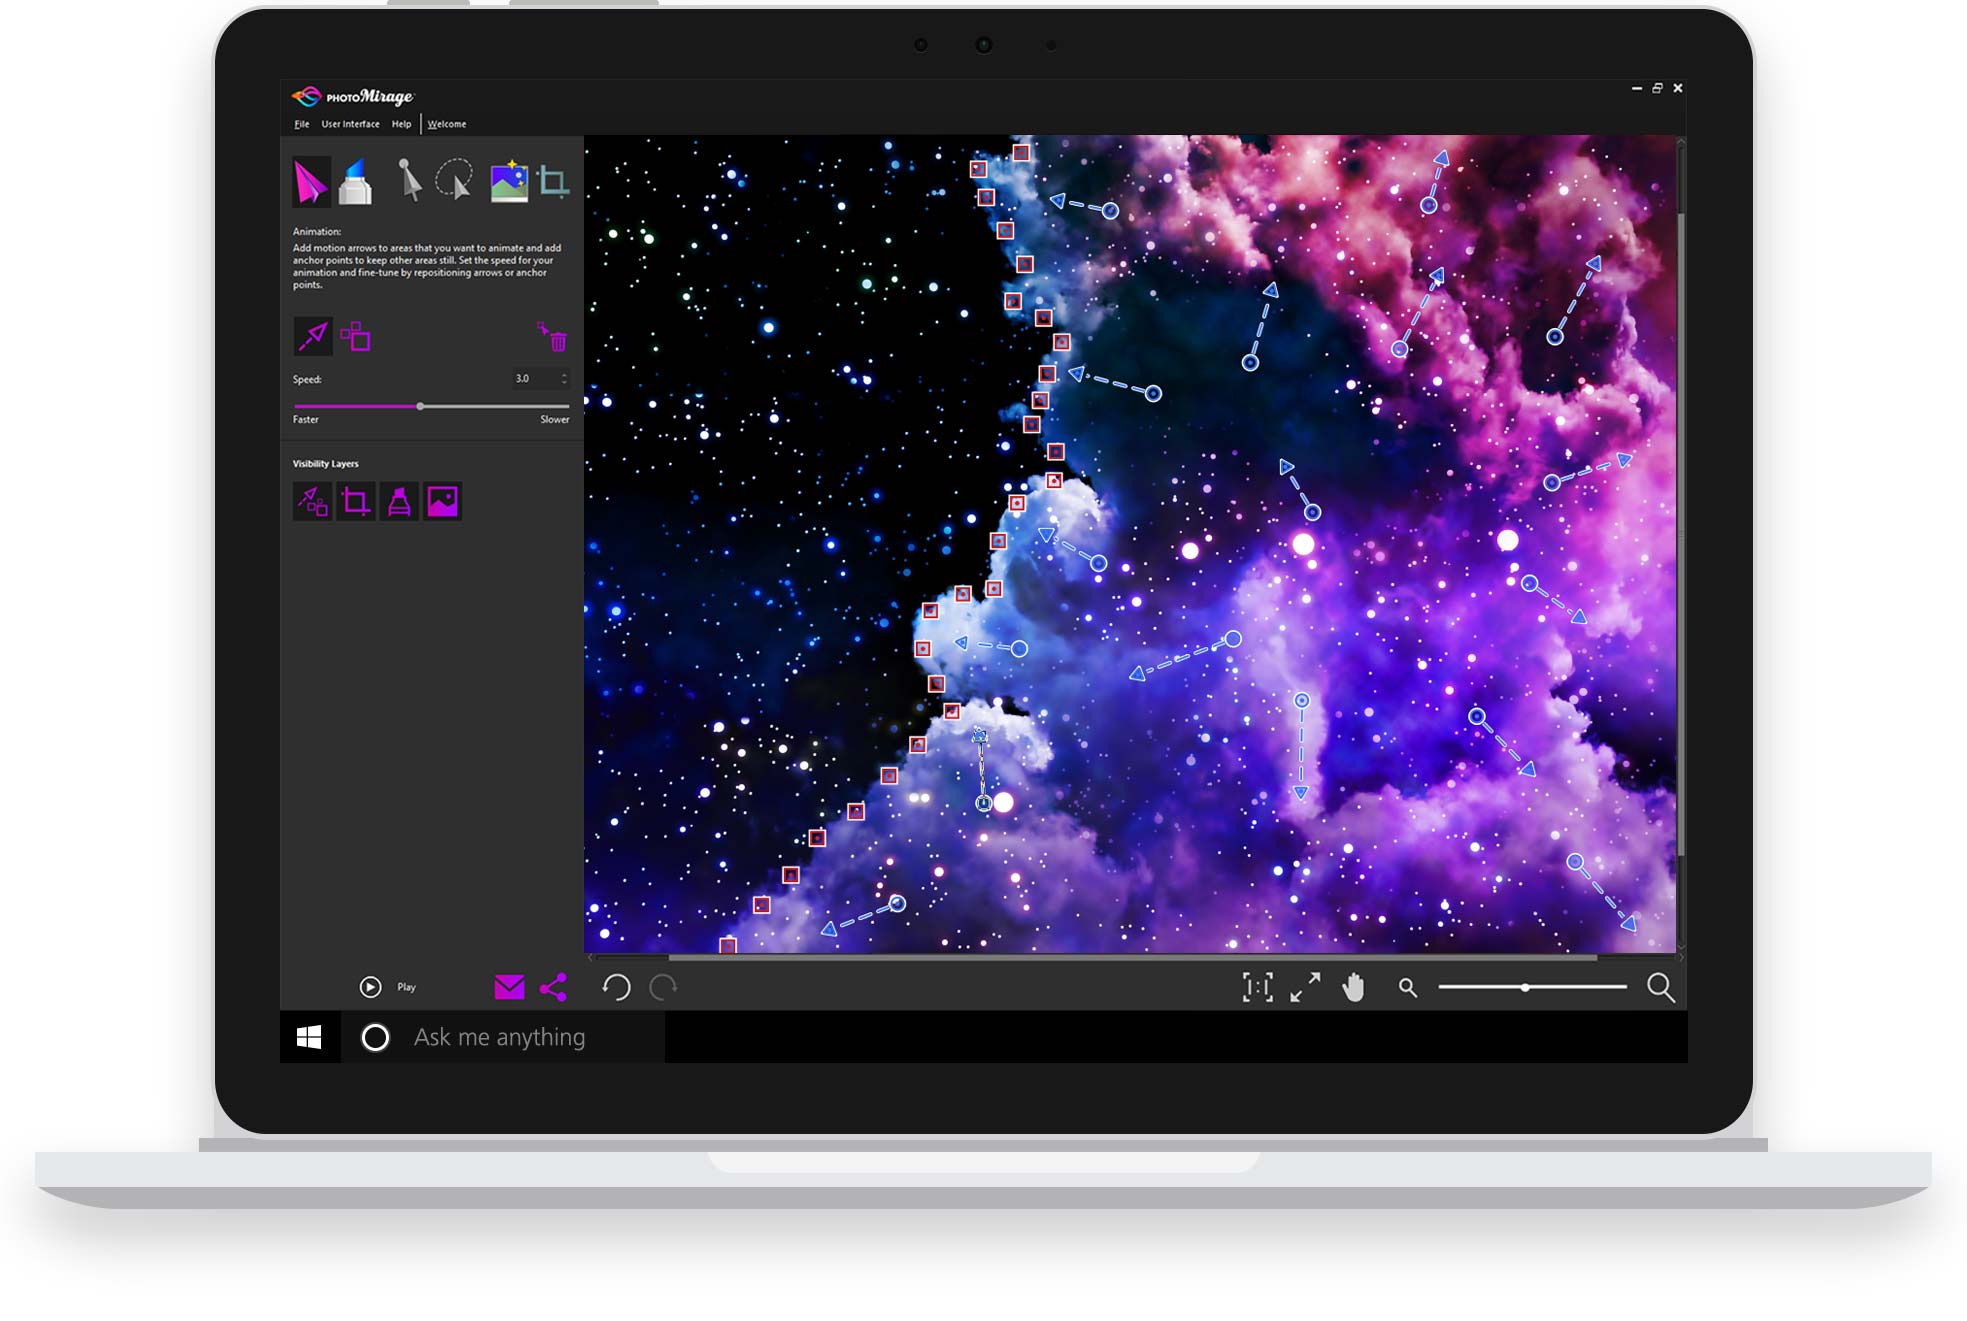 best video animation software for mac